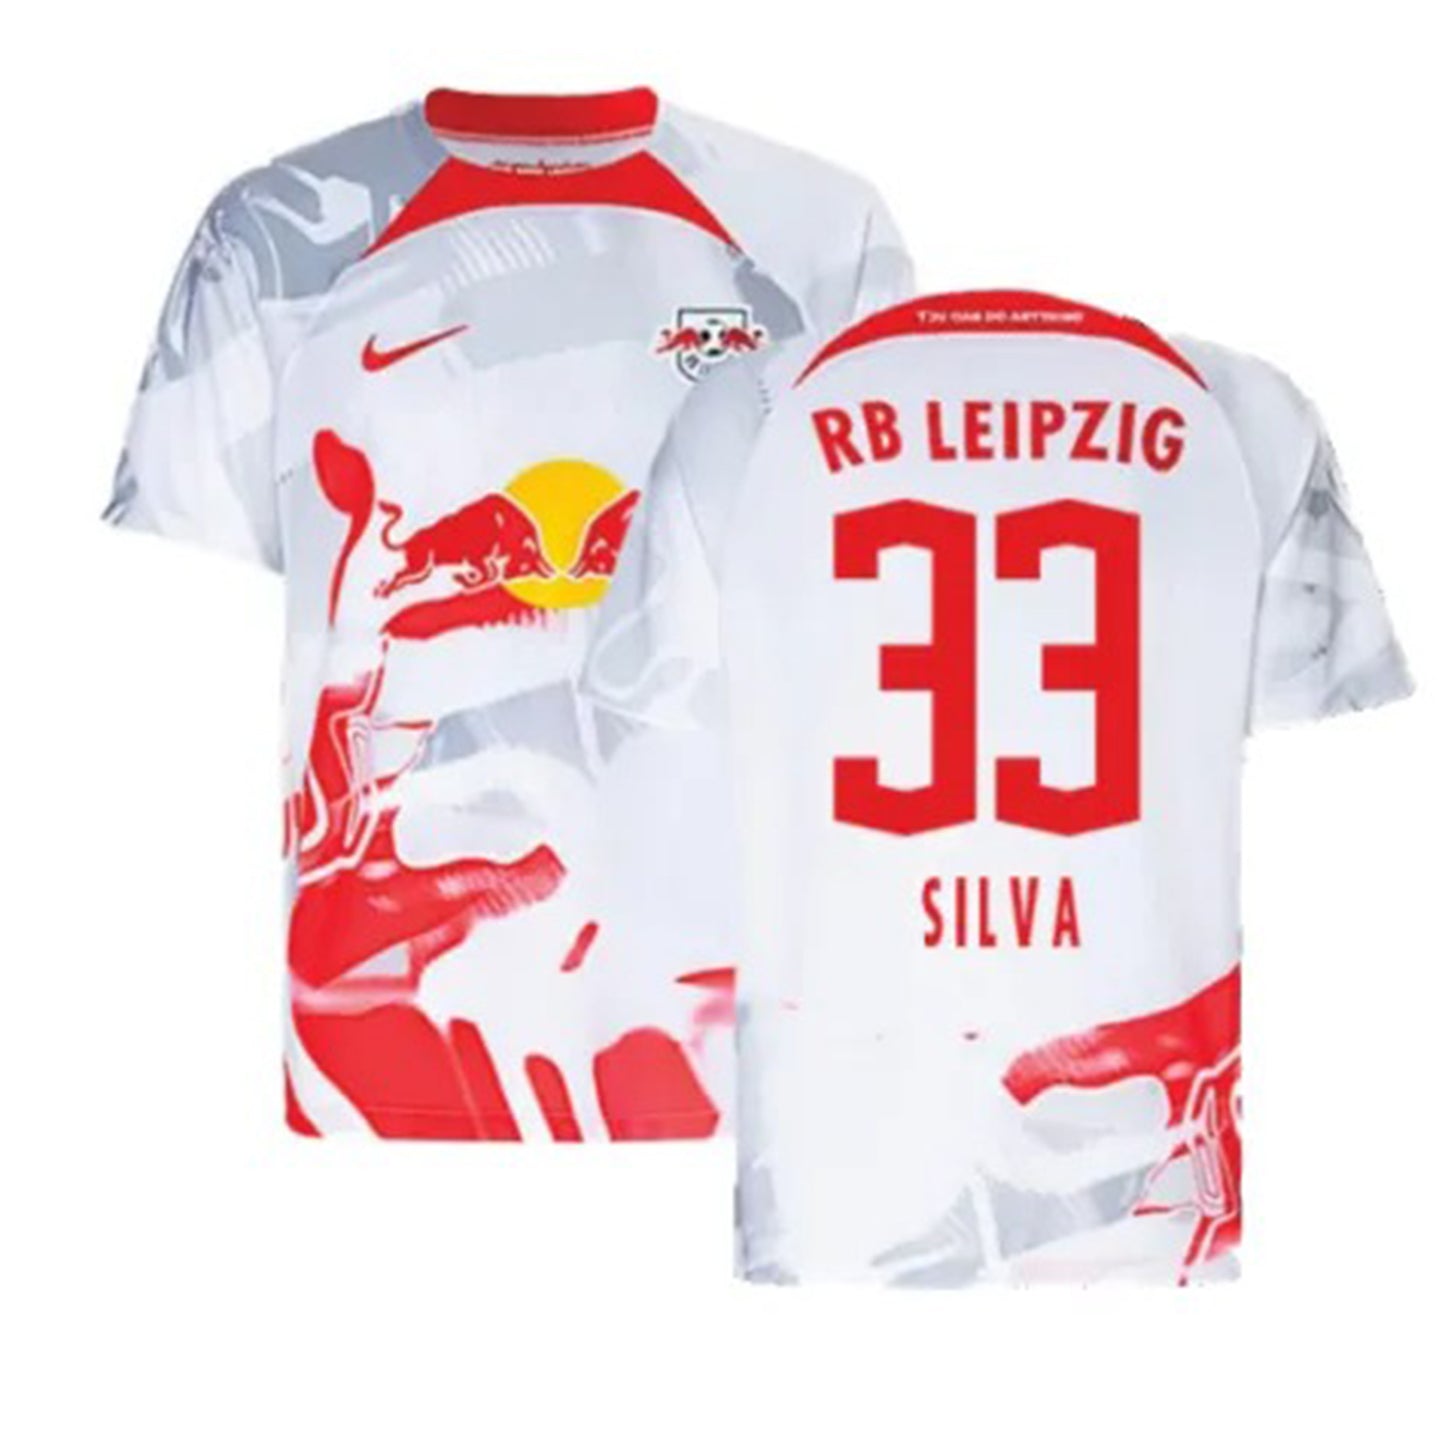 André Silva RB Leipzig 33 Jersey